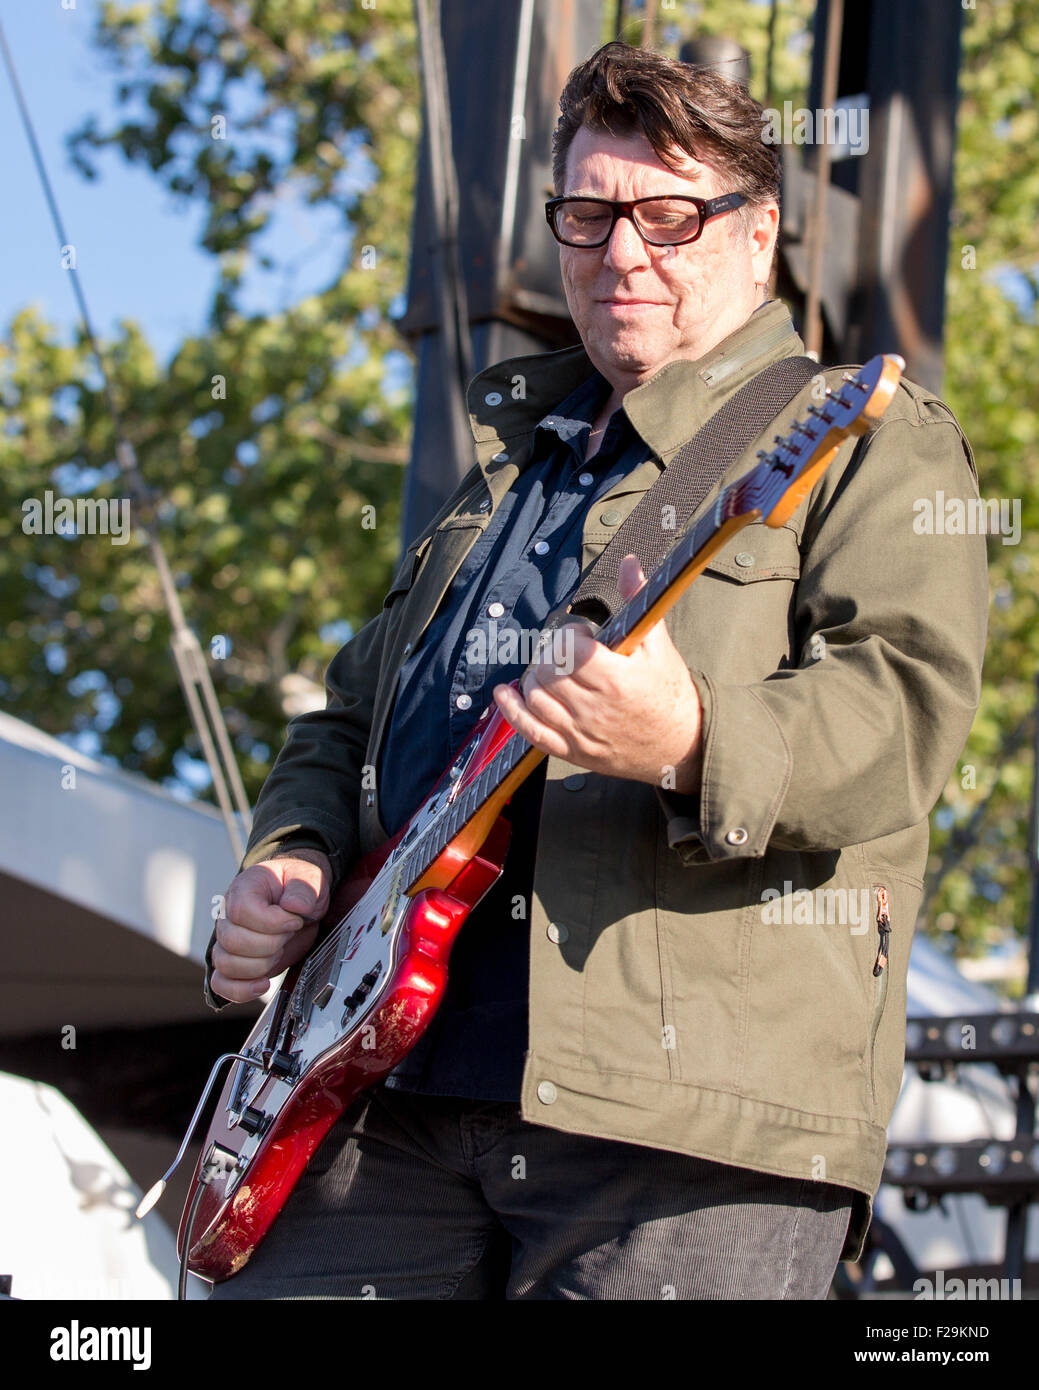 Chicago, Illinois, USA. 12th Sep, 2015. Guitarist WILL SERGEANT of Echo & the Bunnymen performs live during Riot Fest at Douglas Park in Chicago, Illinois © Daniel DeSlover/ZUMA Wire/Alamy Live News Stock Photo